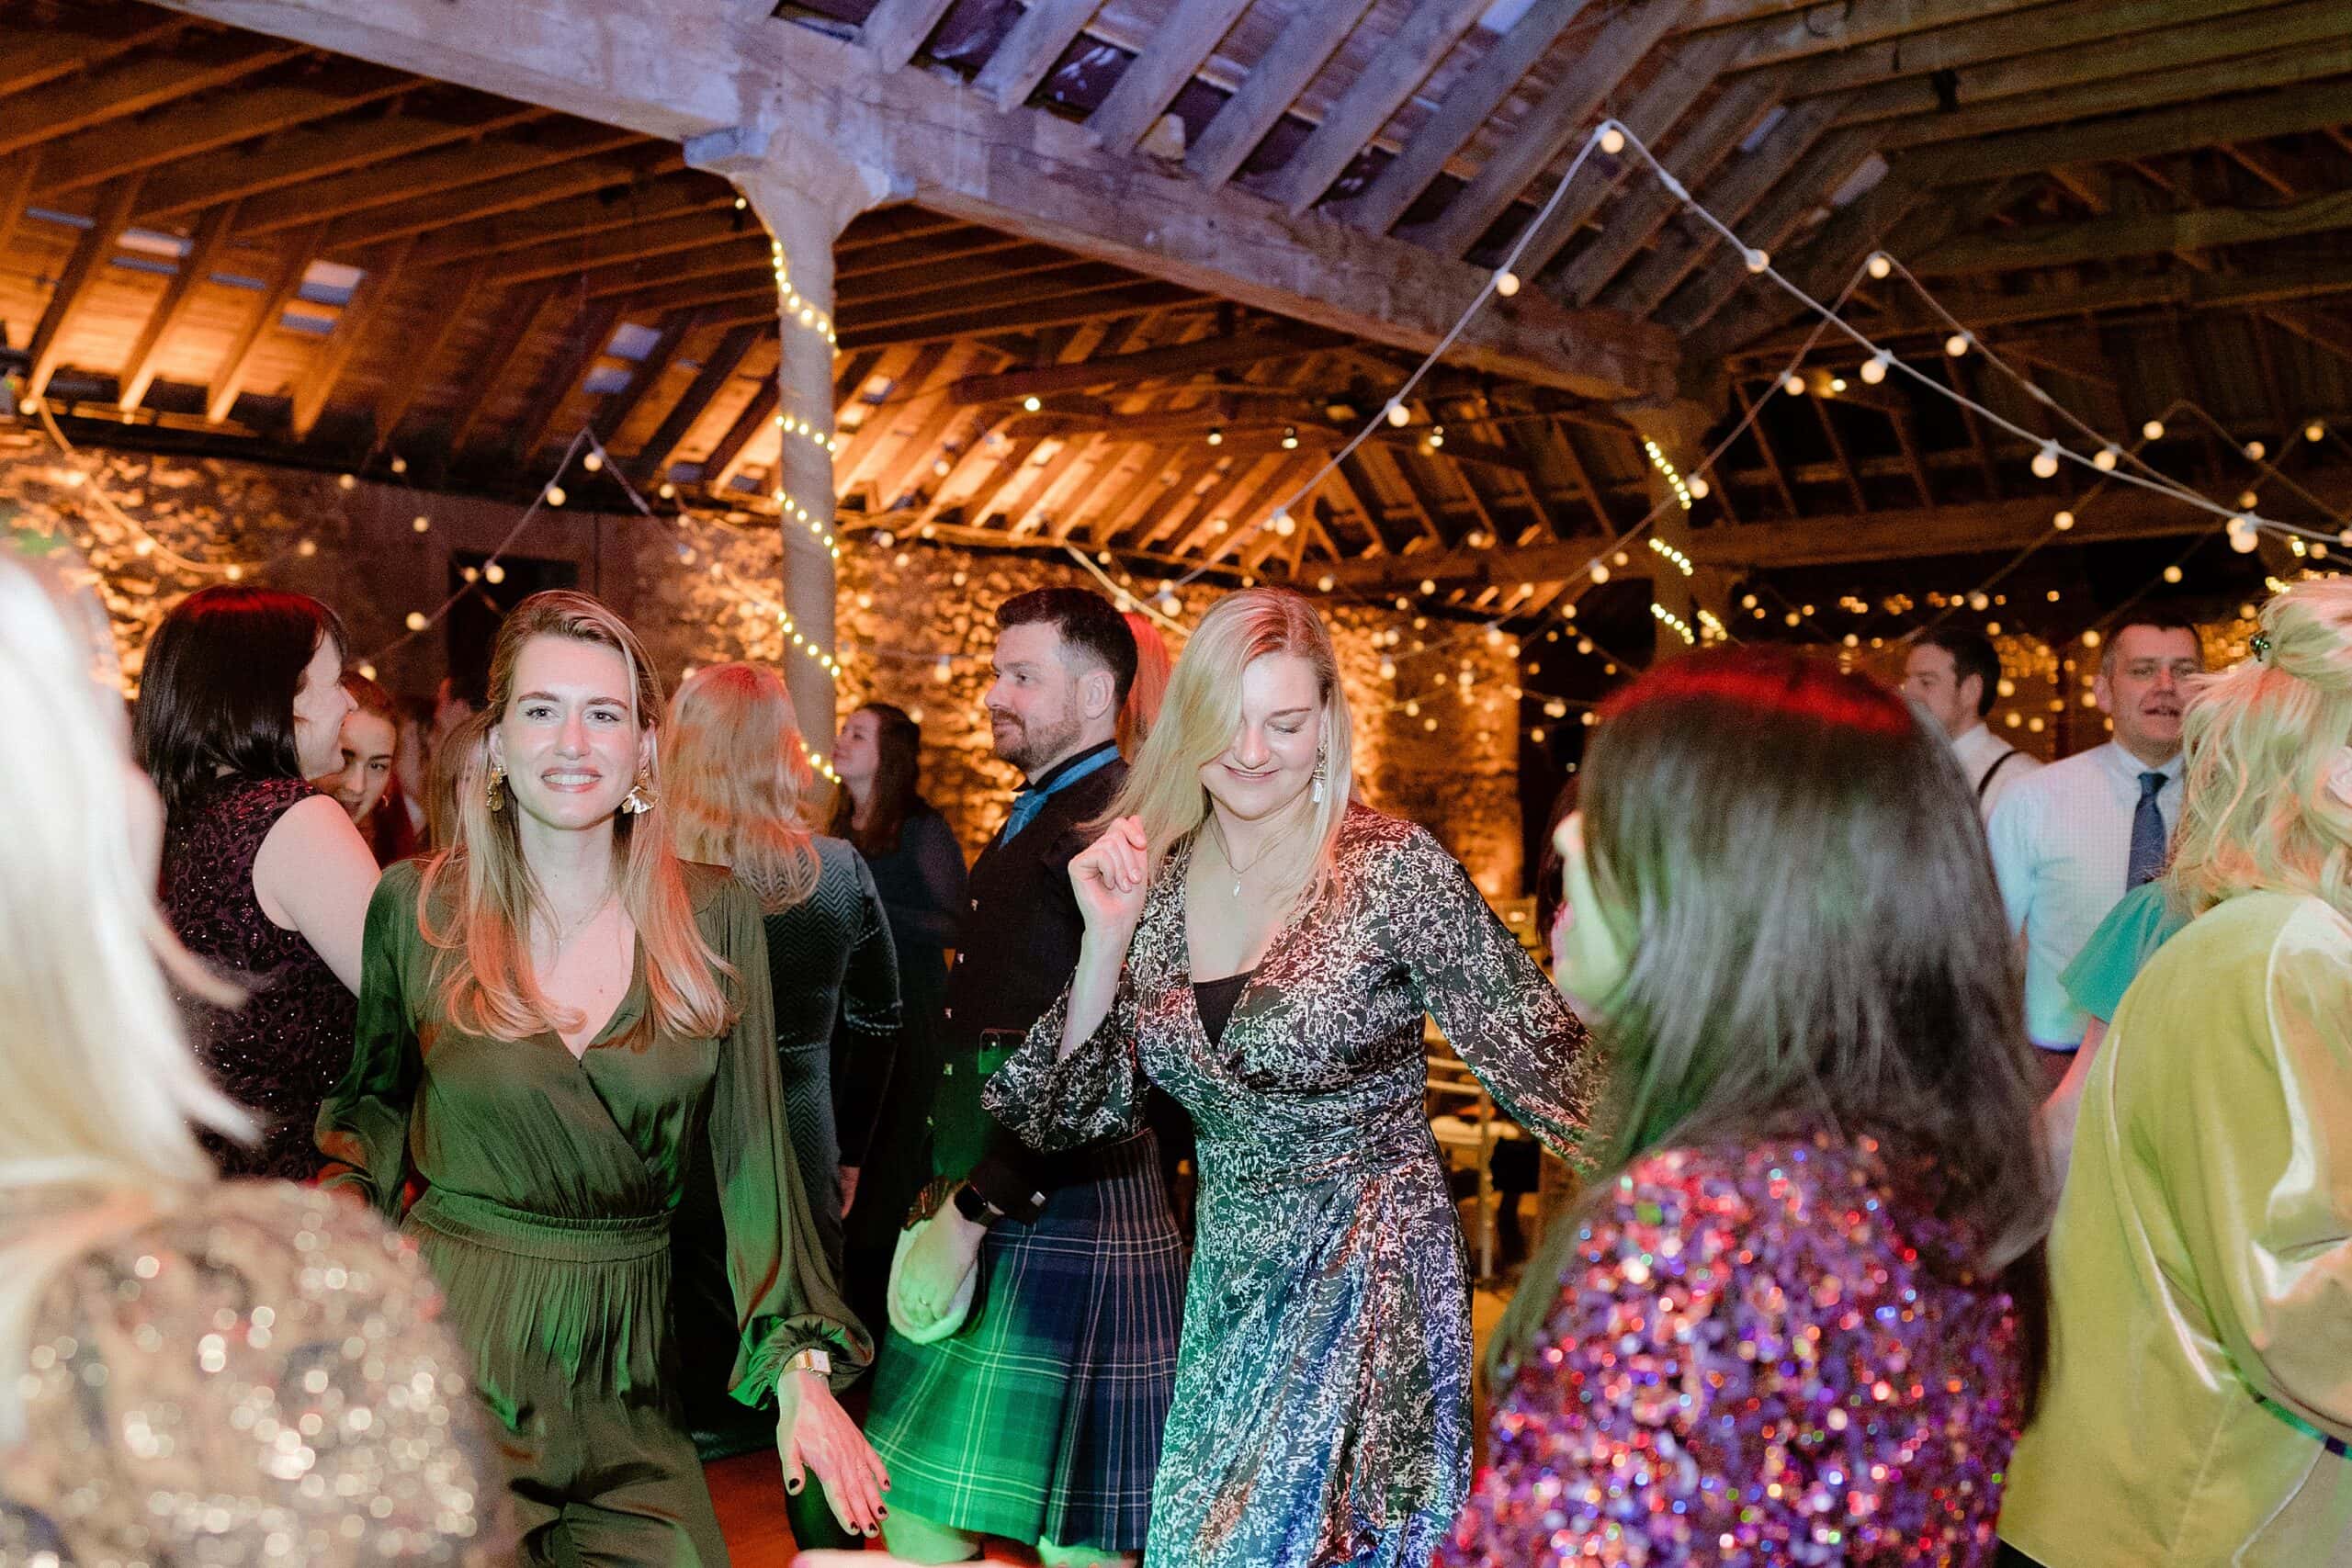 st andrews wedding photographer captures guests dancing underneath wooden beams and festoon lights at a unique farm wedding venue in scotland